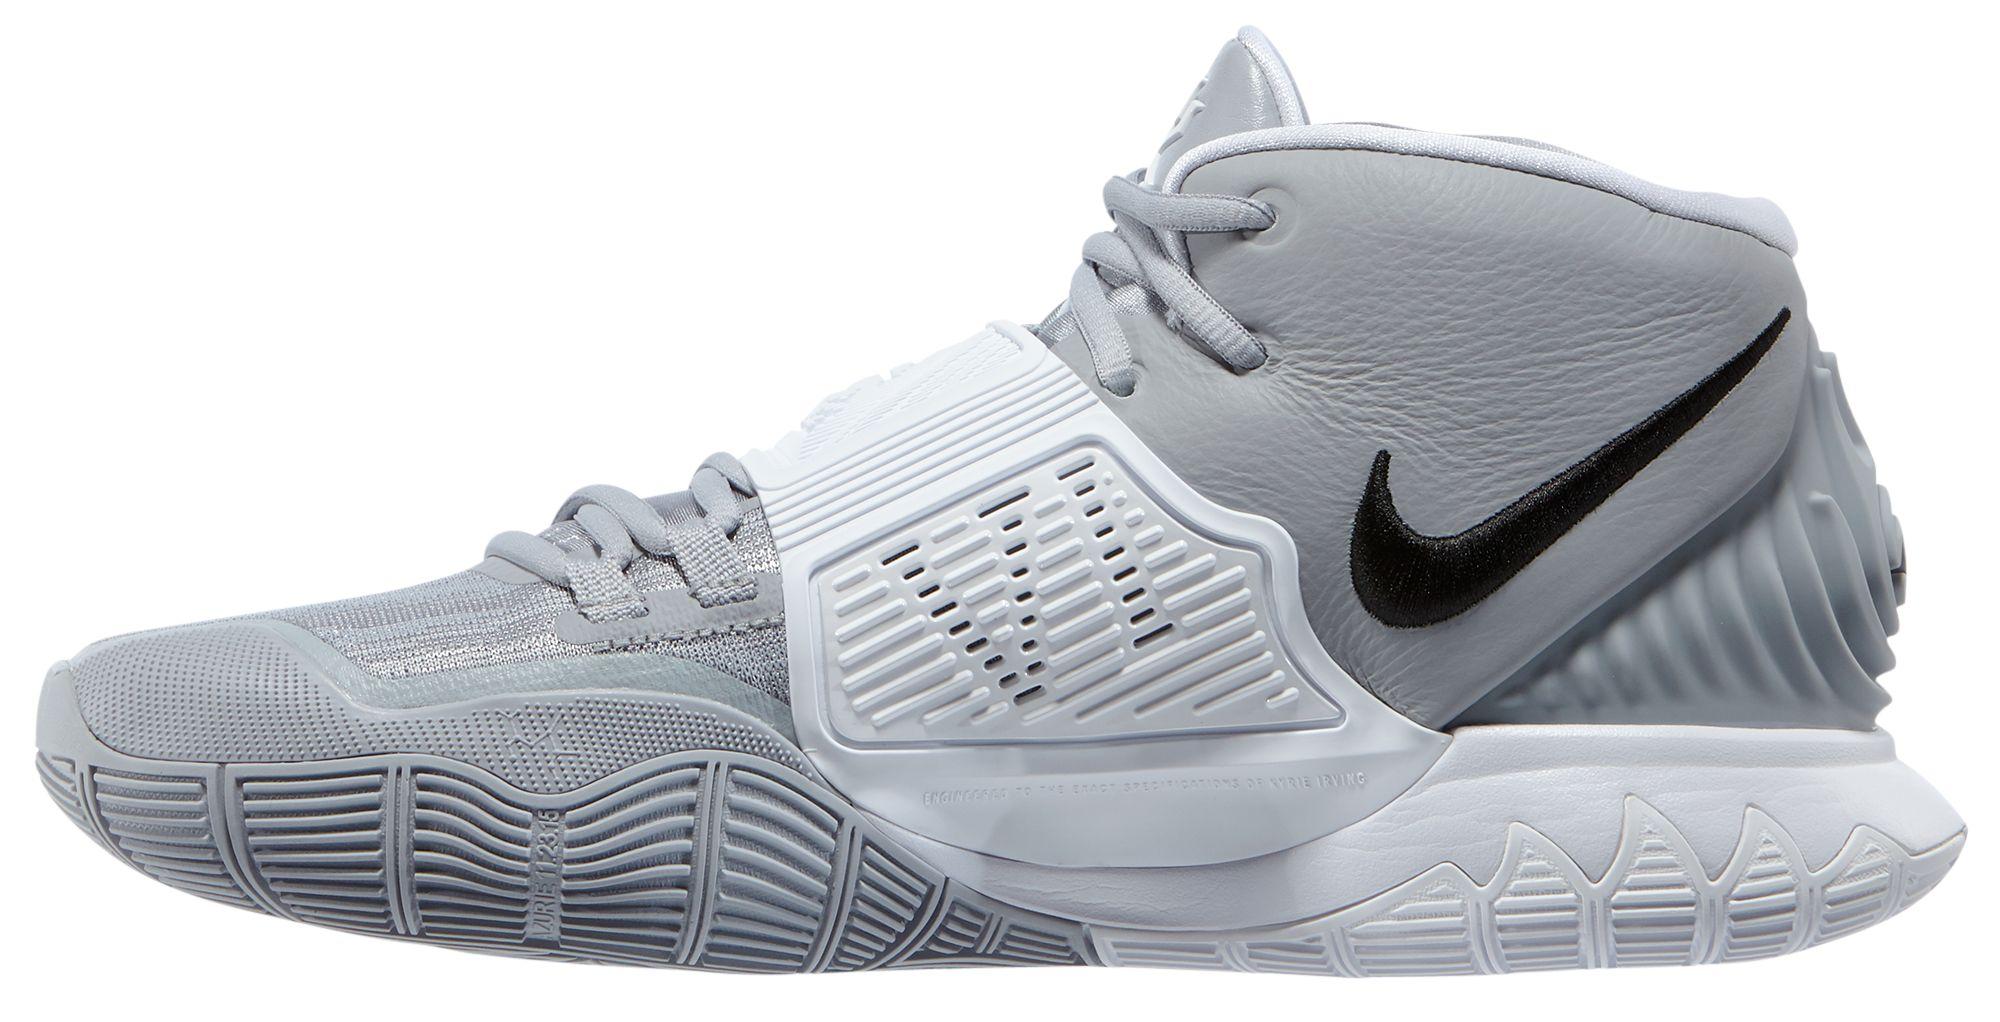 kyrie 6 basketball shoes white